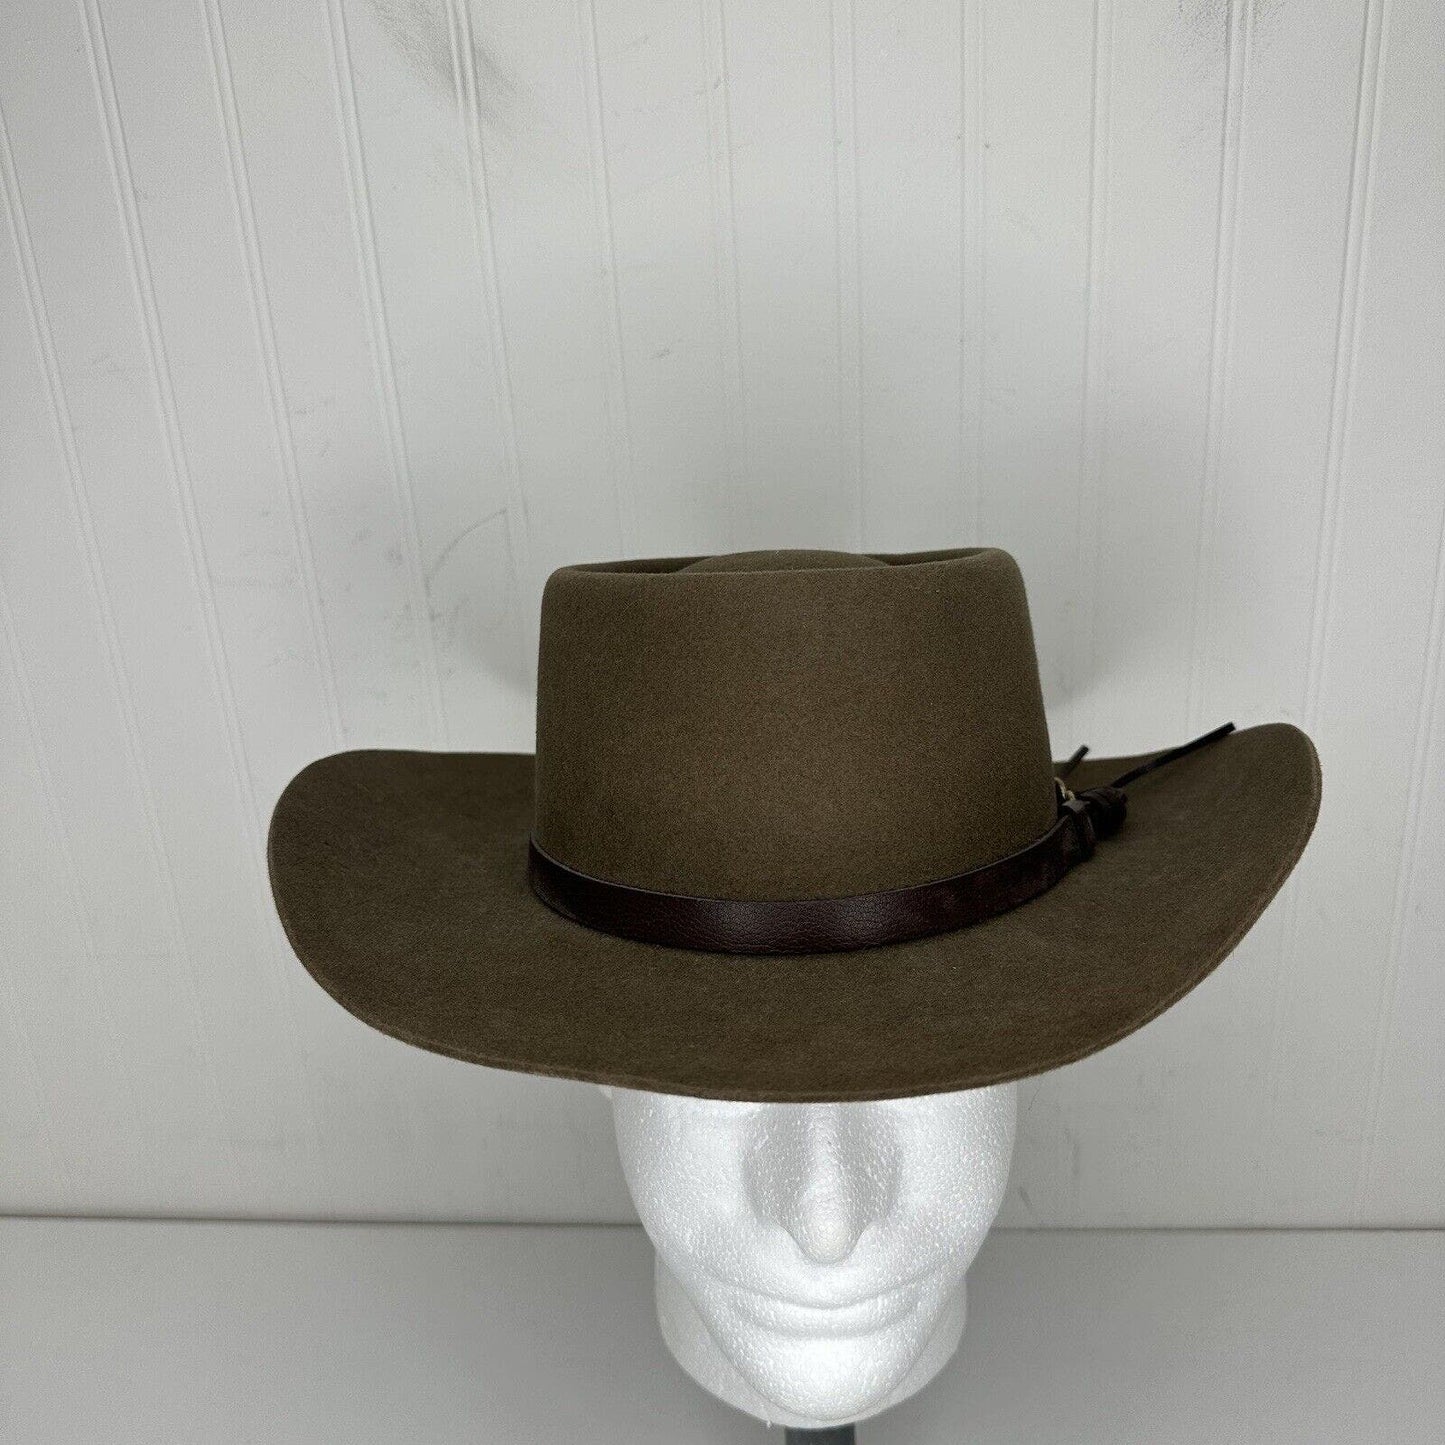 The Austalian Outback Collection “JACKEROO” Hat Brown Size: 6⅞ (55 Metric)